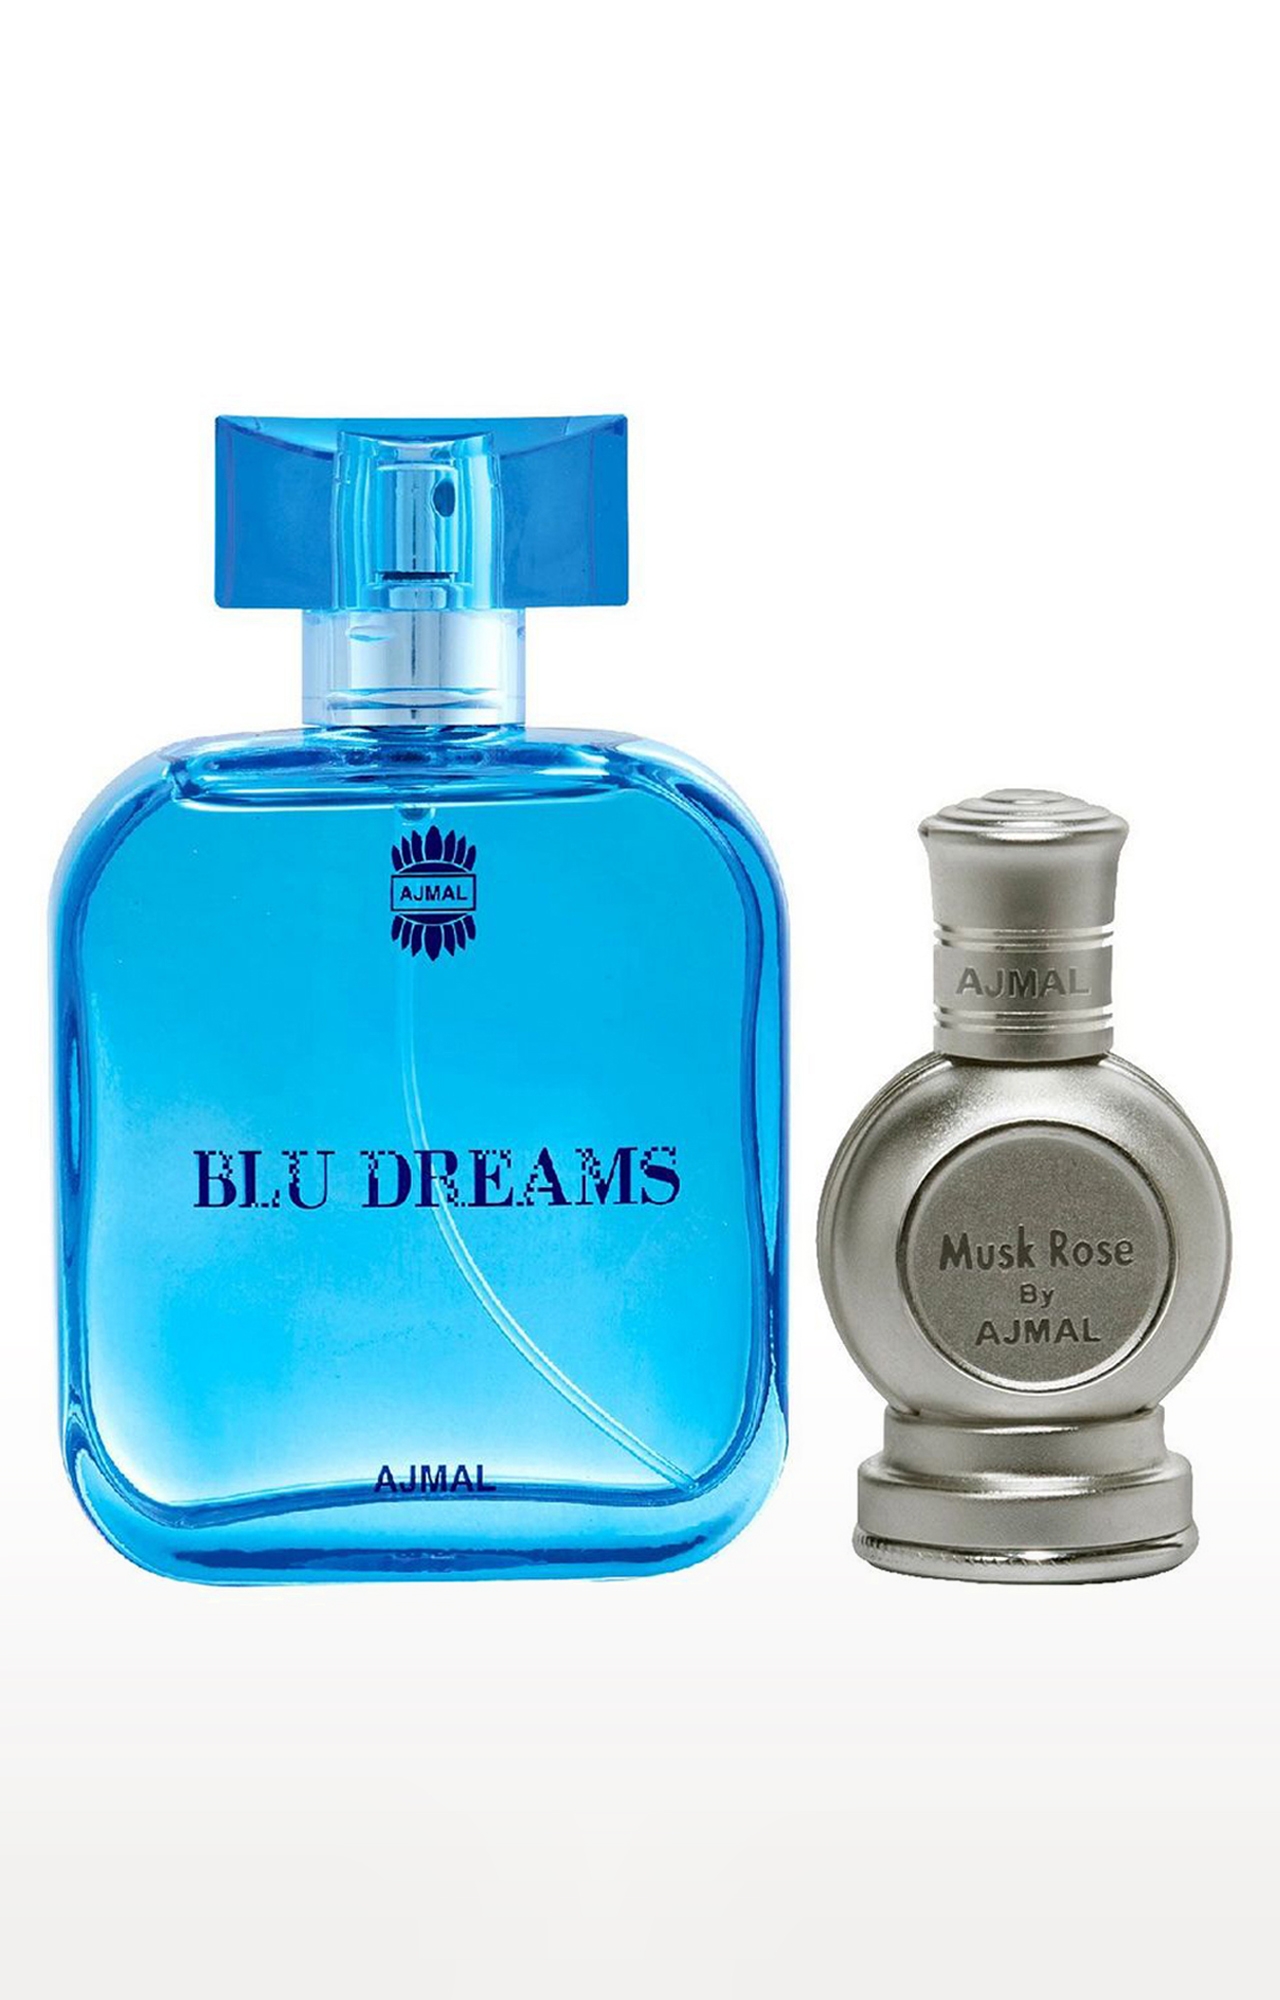 Ajmal Blu Dreams EDP Citurs Fruity Perfume 100ml for Men and Musk Rose Concentrated Perfume Oil Musky Alcohol-free Attar 12ml for Unisex